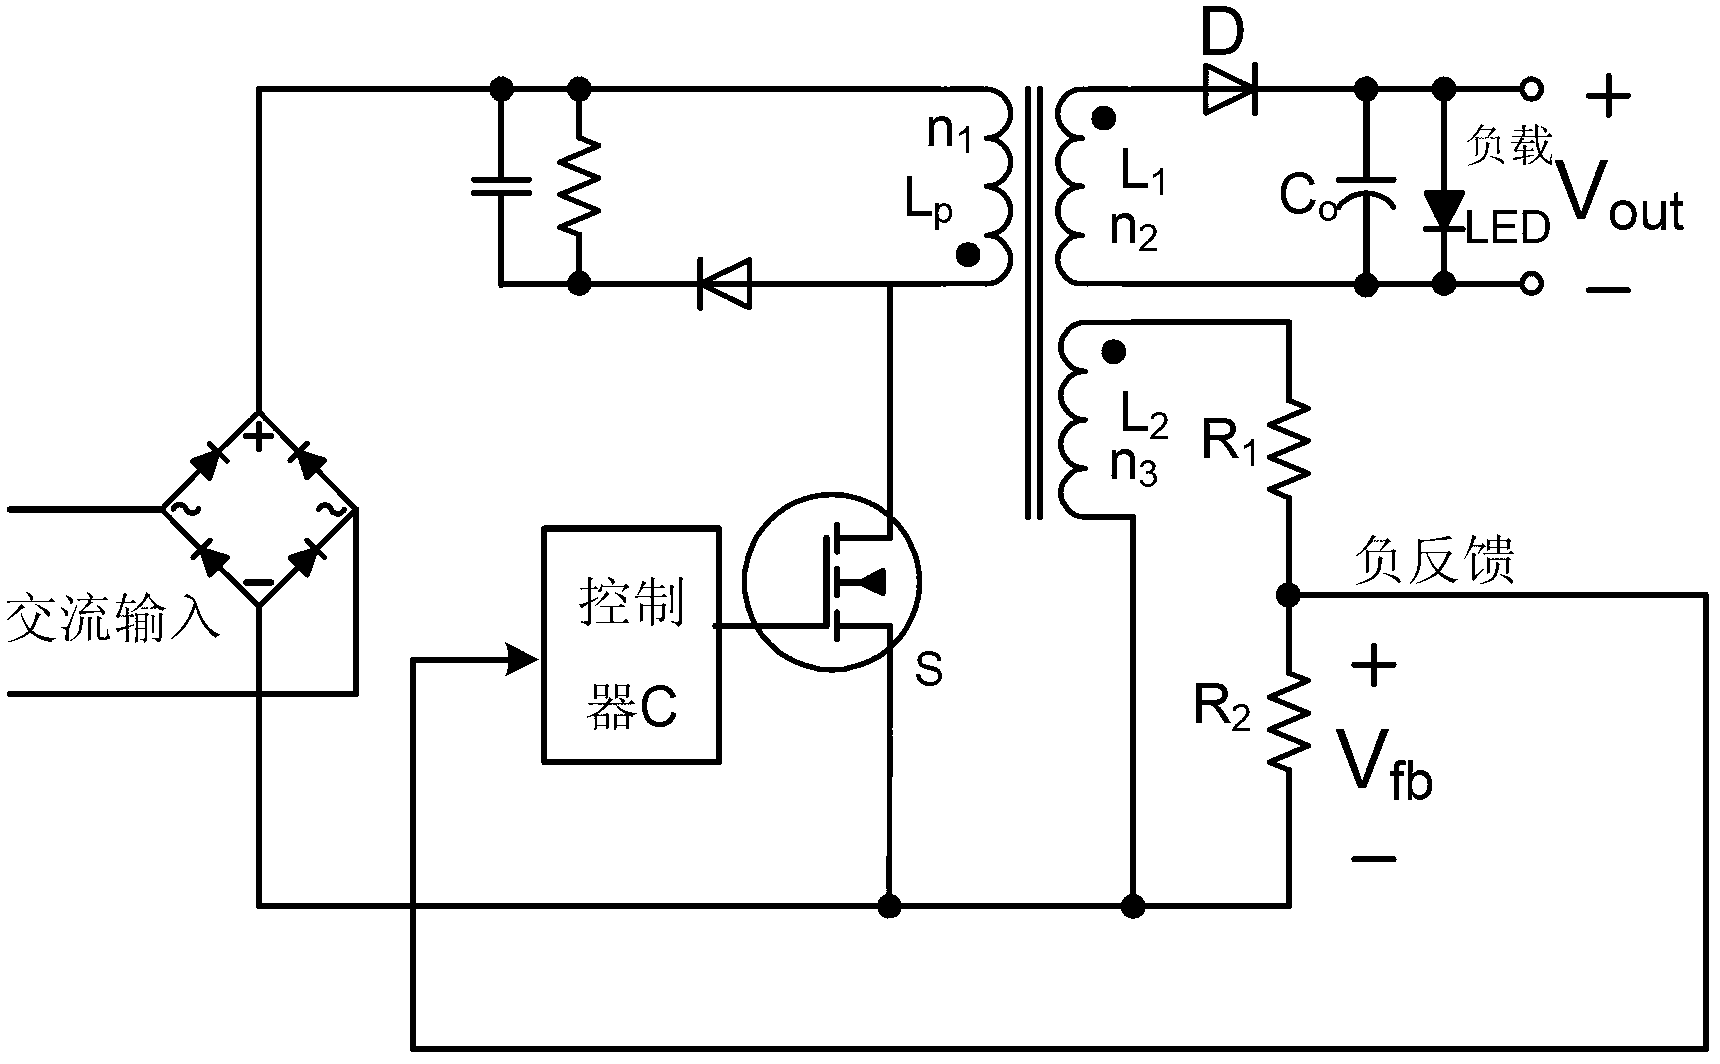 Light emitting diode (LED) drive circuit controlled by parallel connection high voltage metal oxide semiconductor (MOS) tube